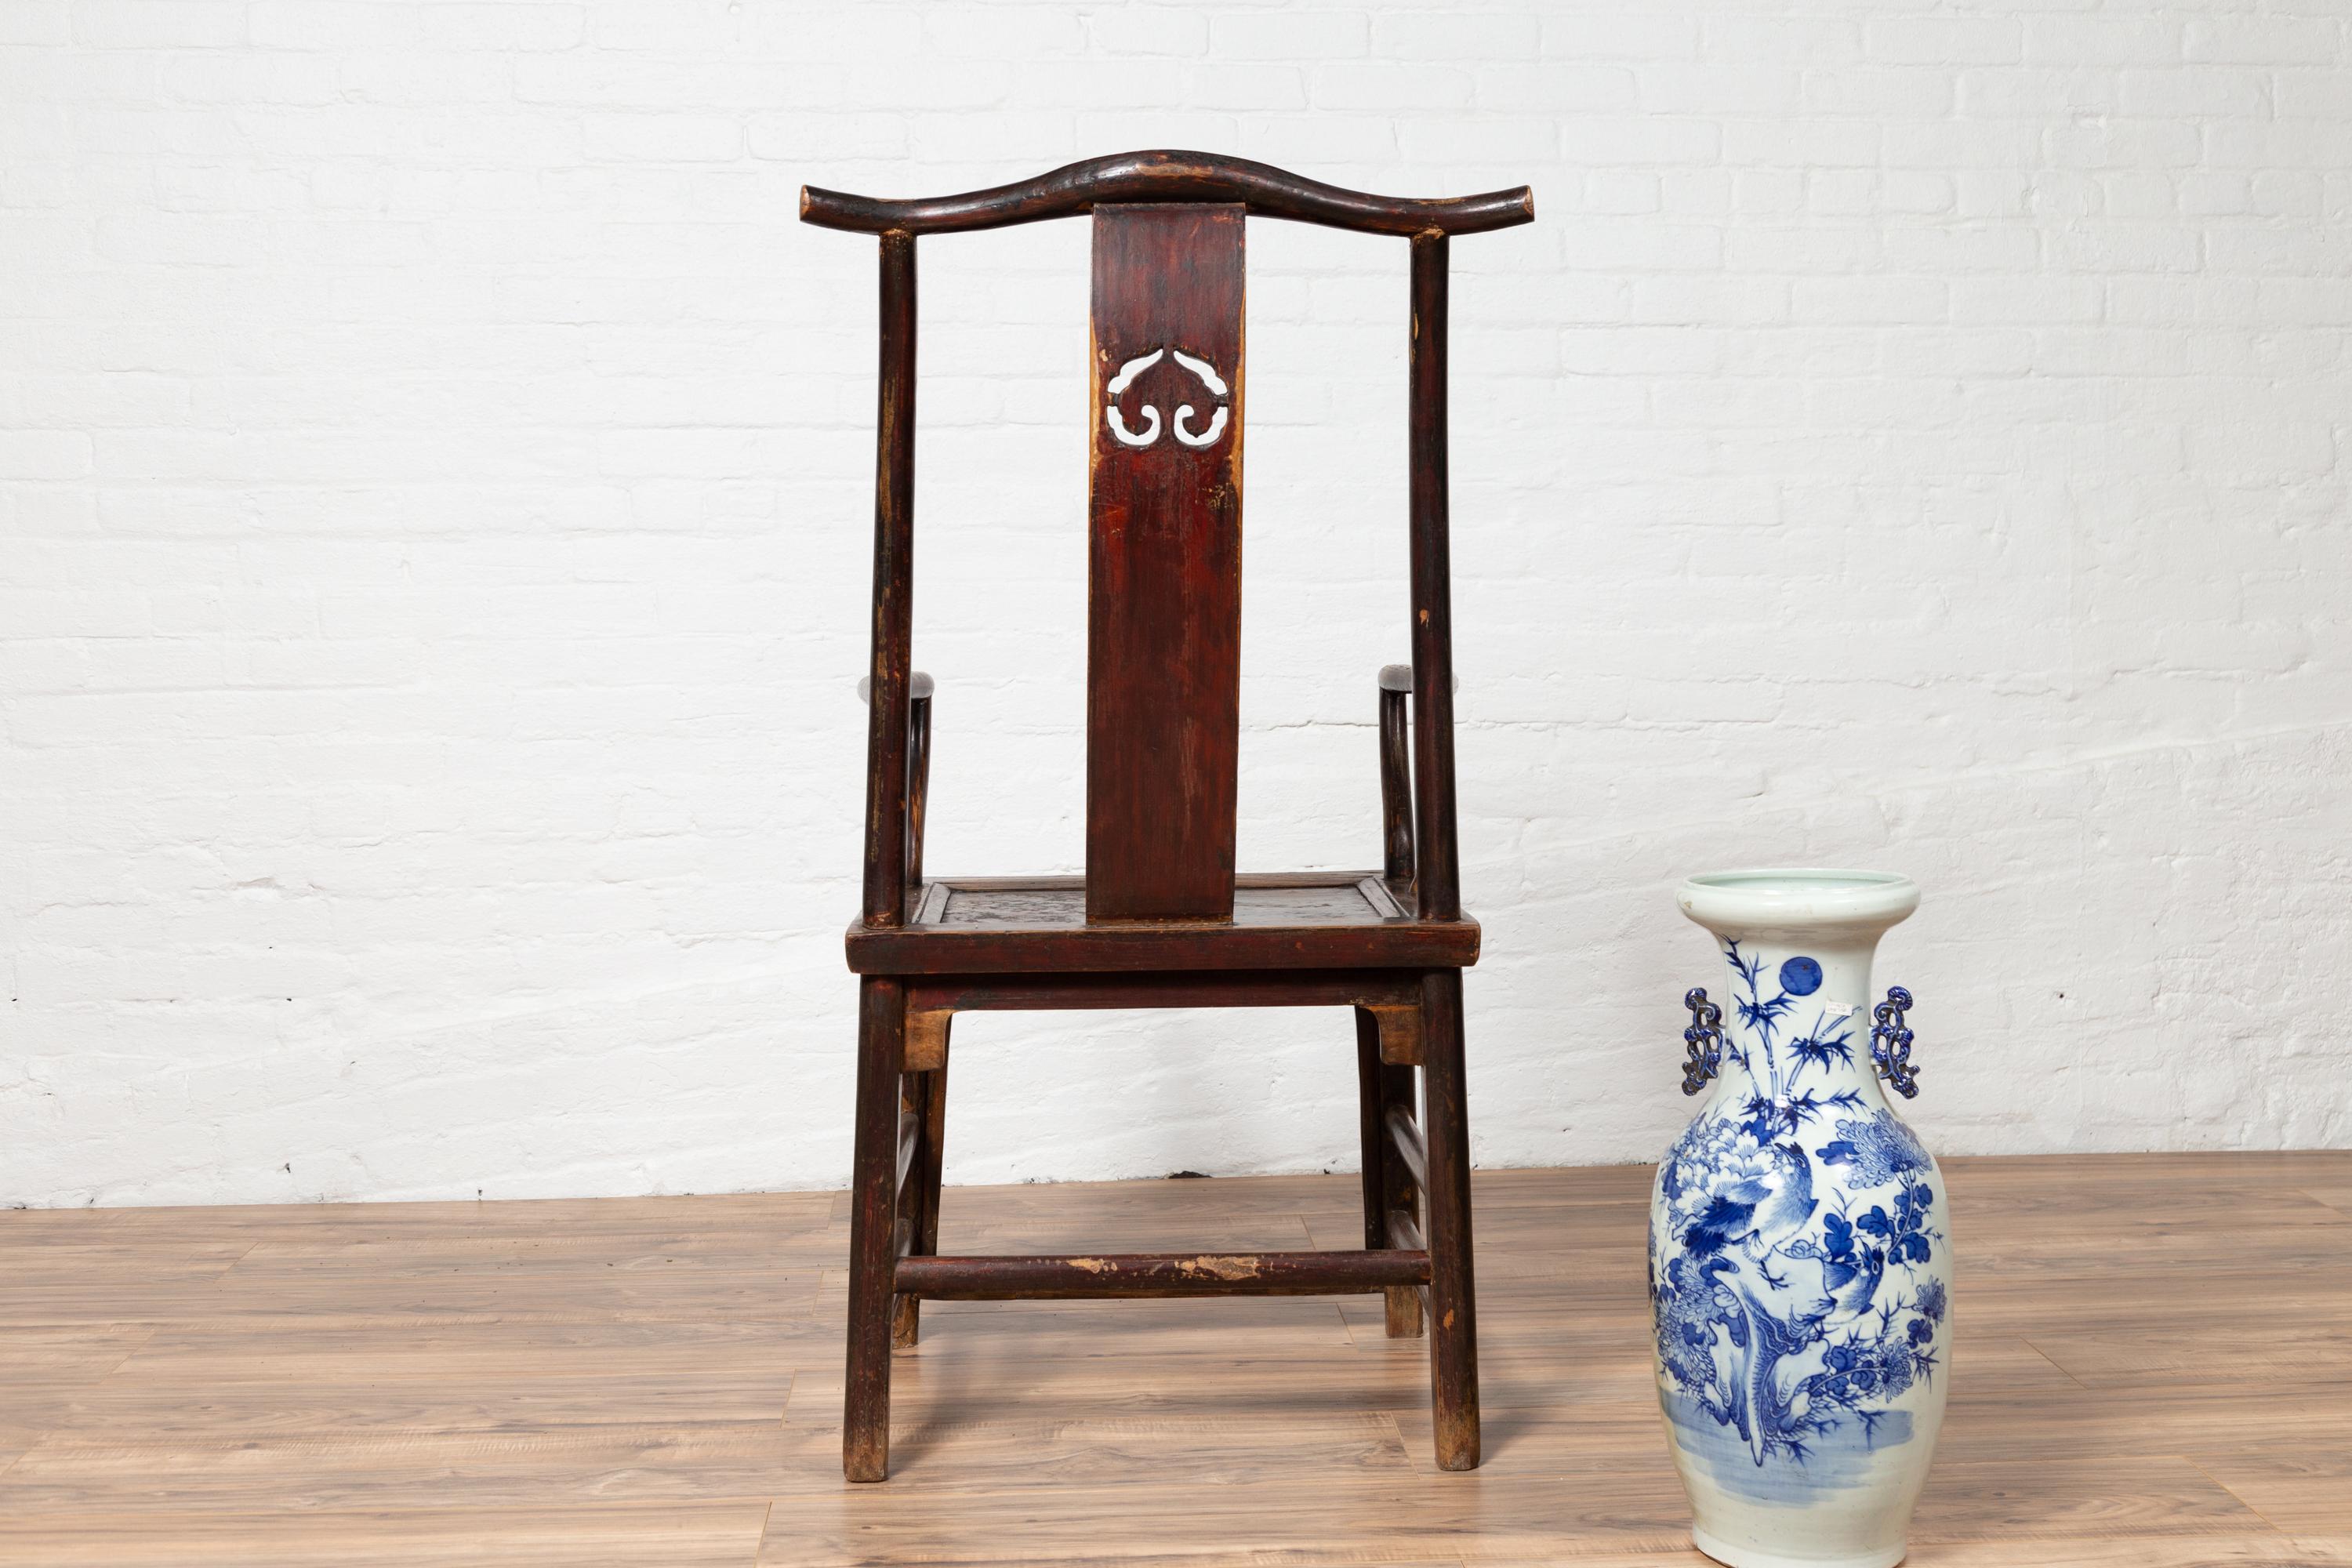 Pair of Chinese 1880s Official's Hat Chairs with Pierced Splats and Curving Arms For Sale 7